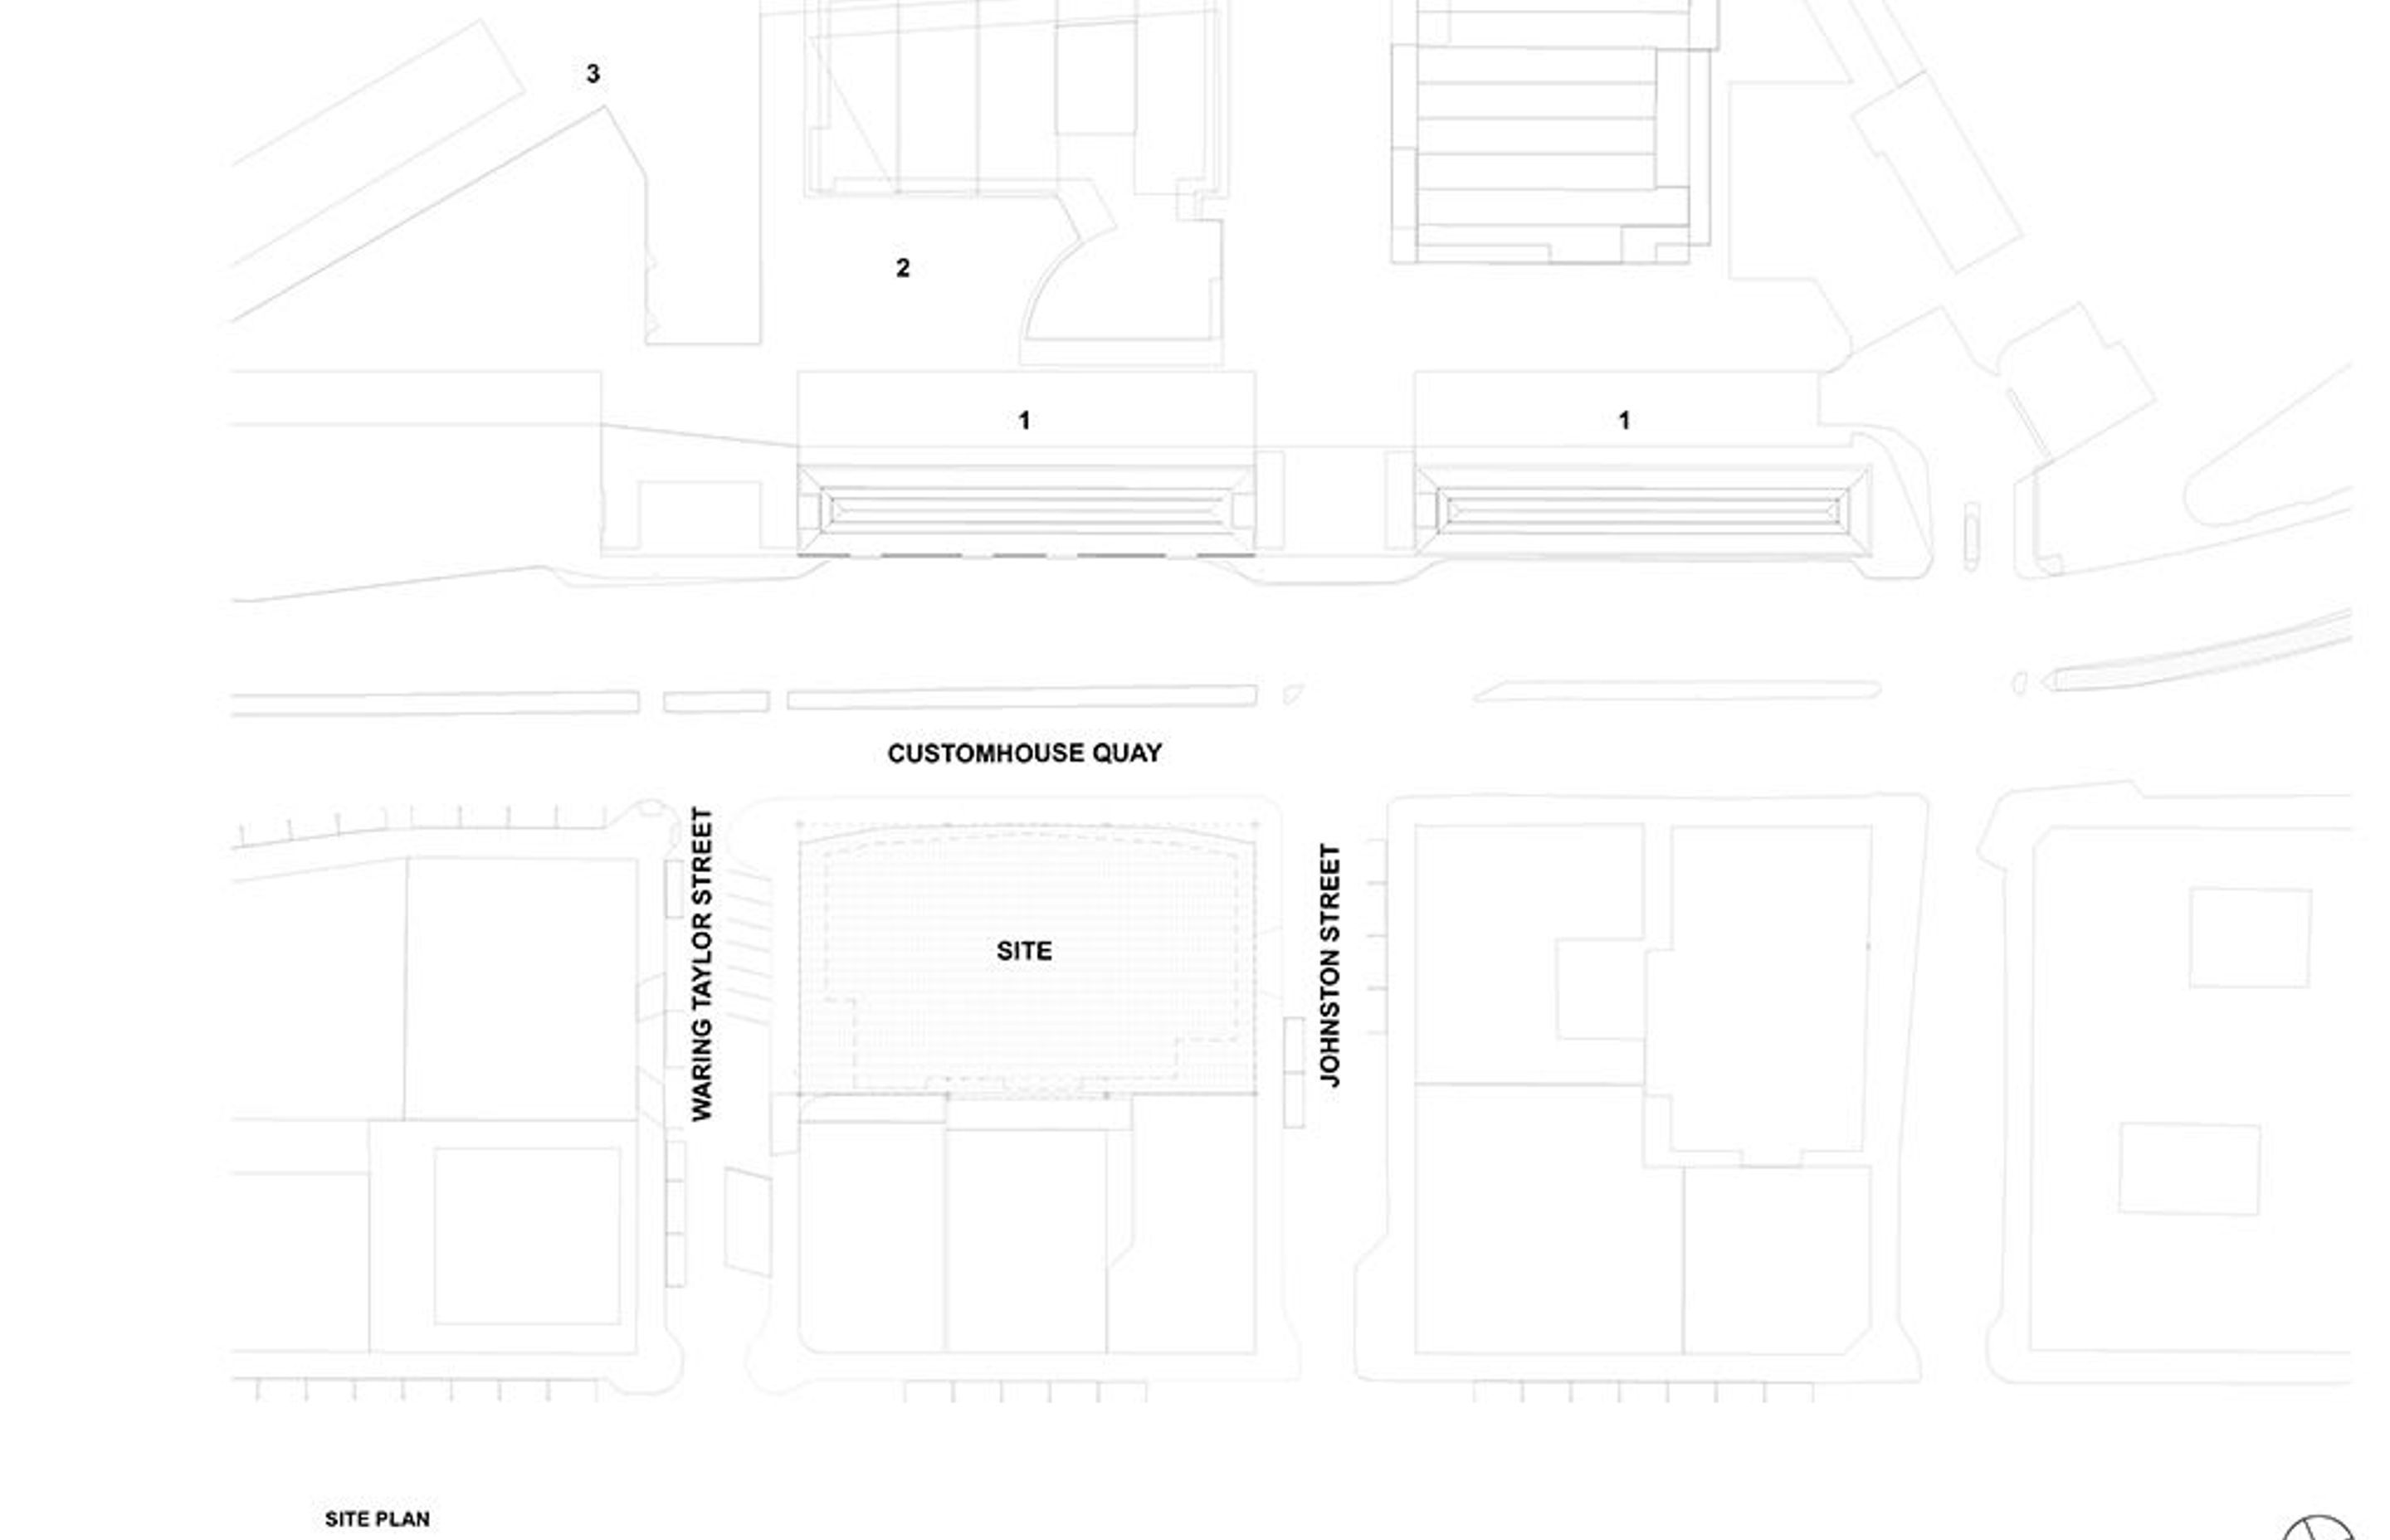 The site plan by Studio Pacific Architecture.